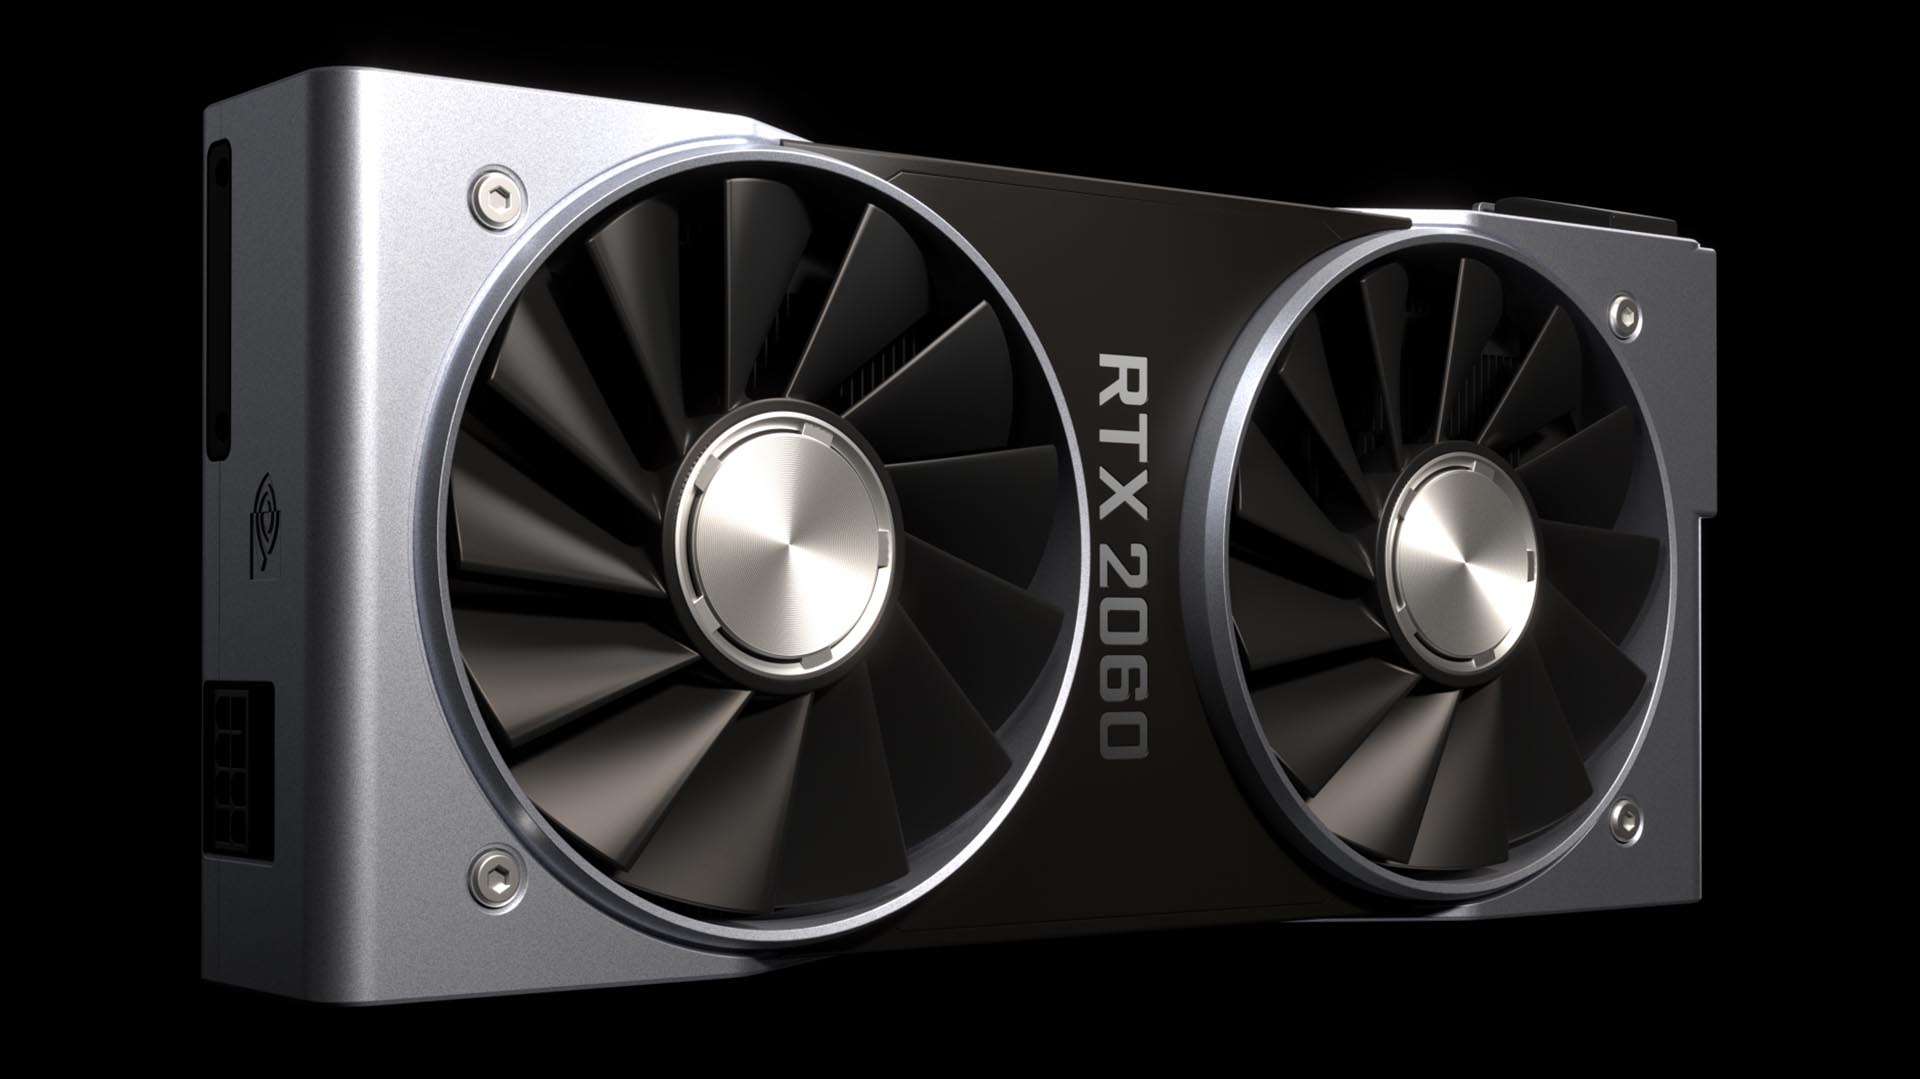 Nvidia Rtx 2060 12gb Founders Edition 1-ийг цуцаллаа